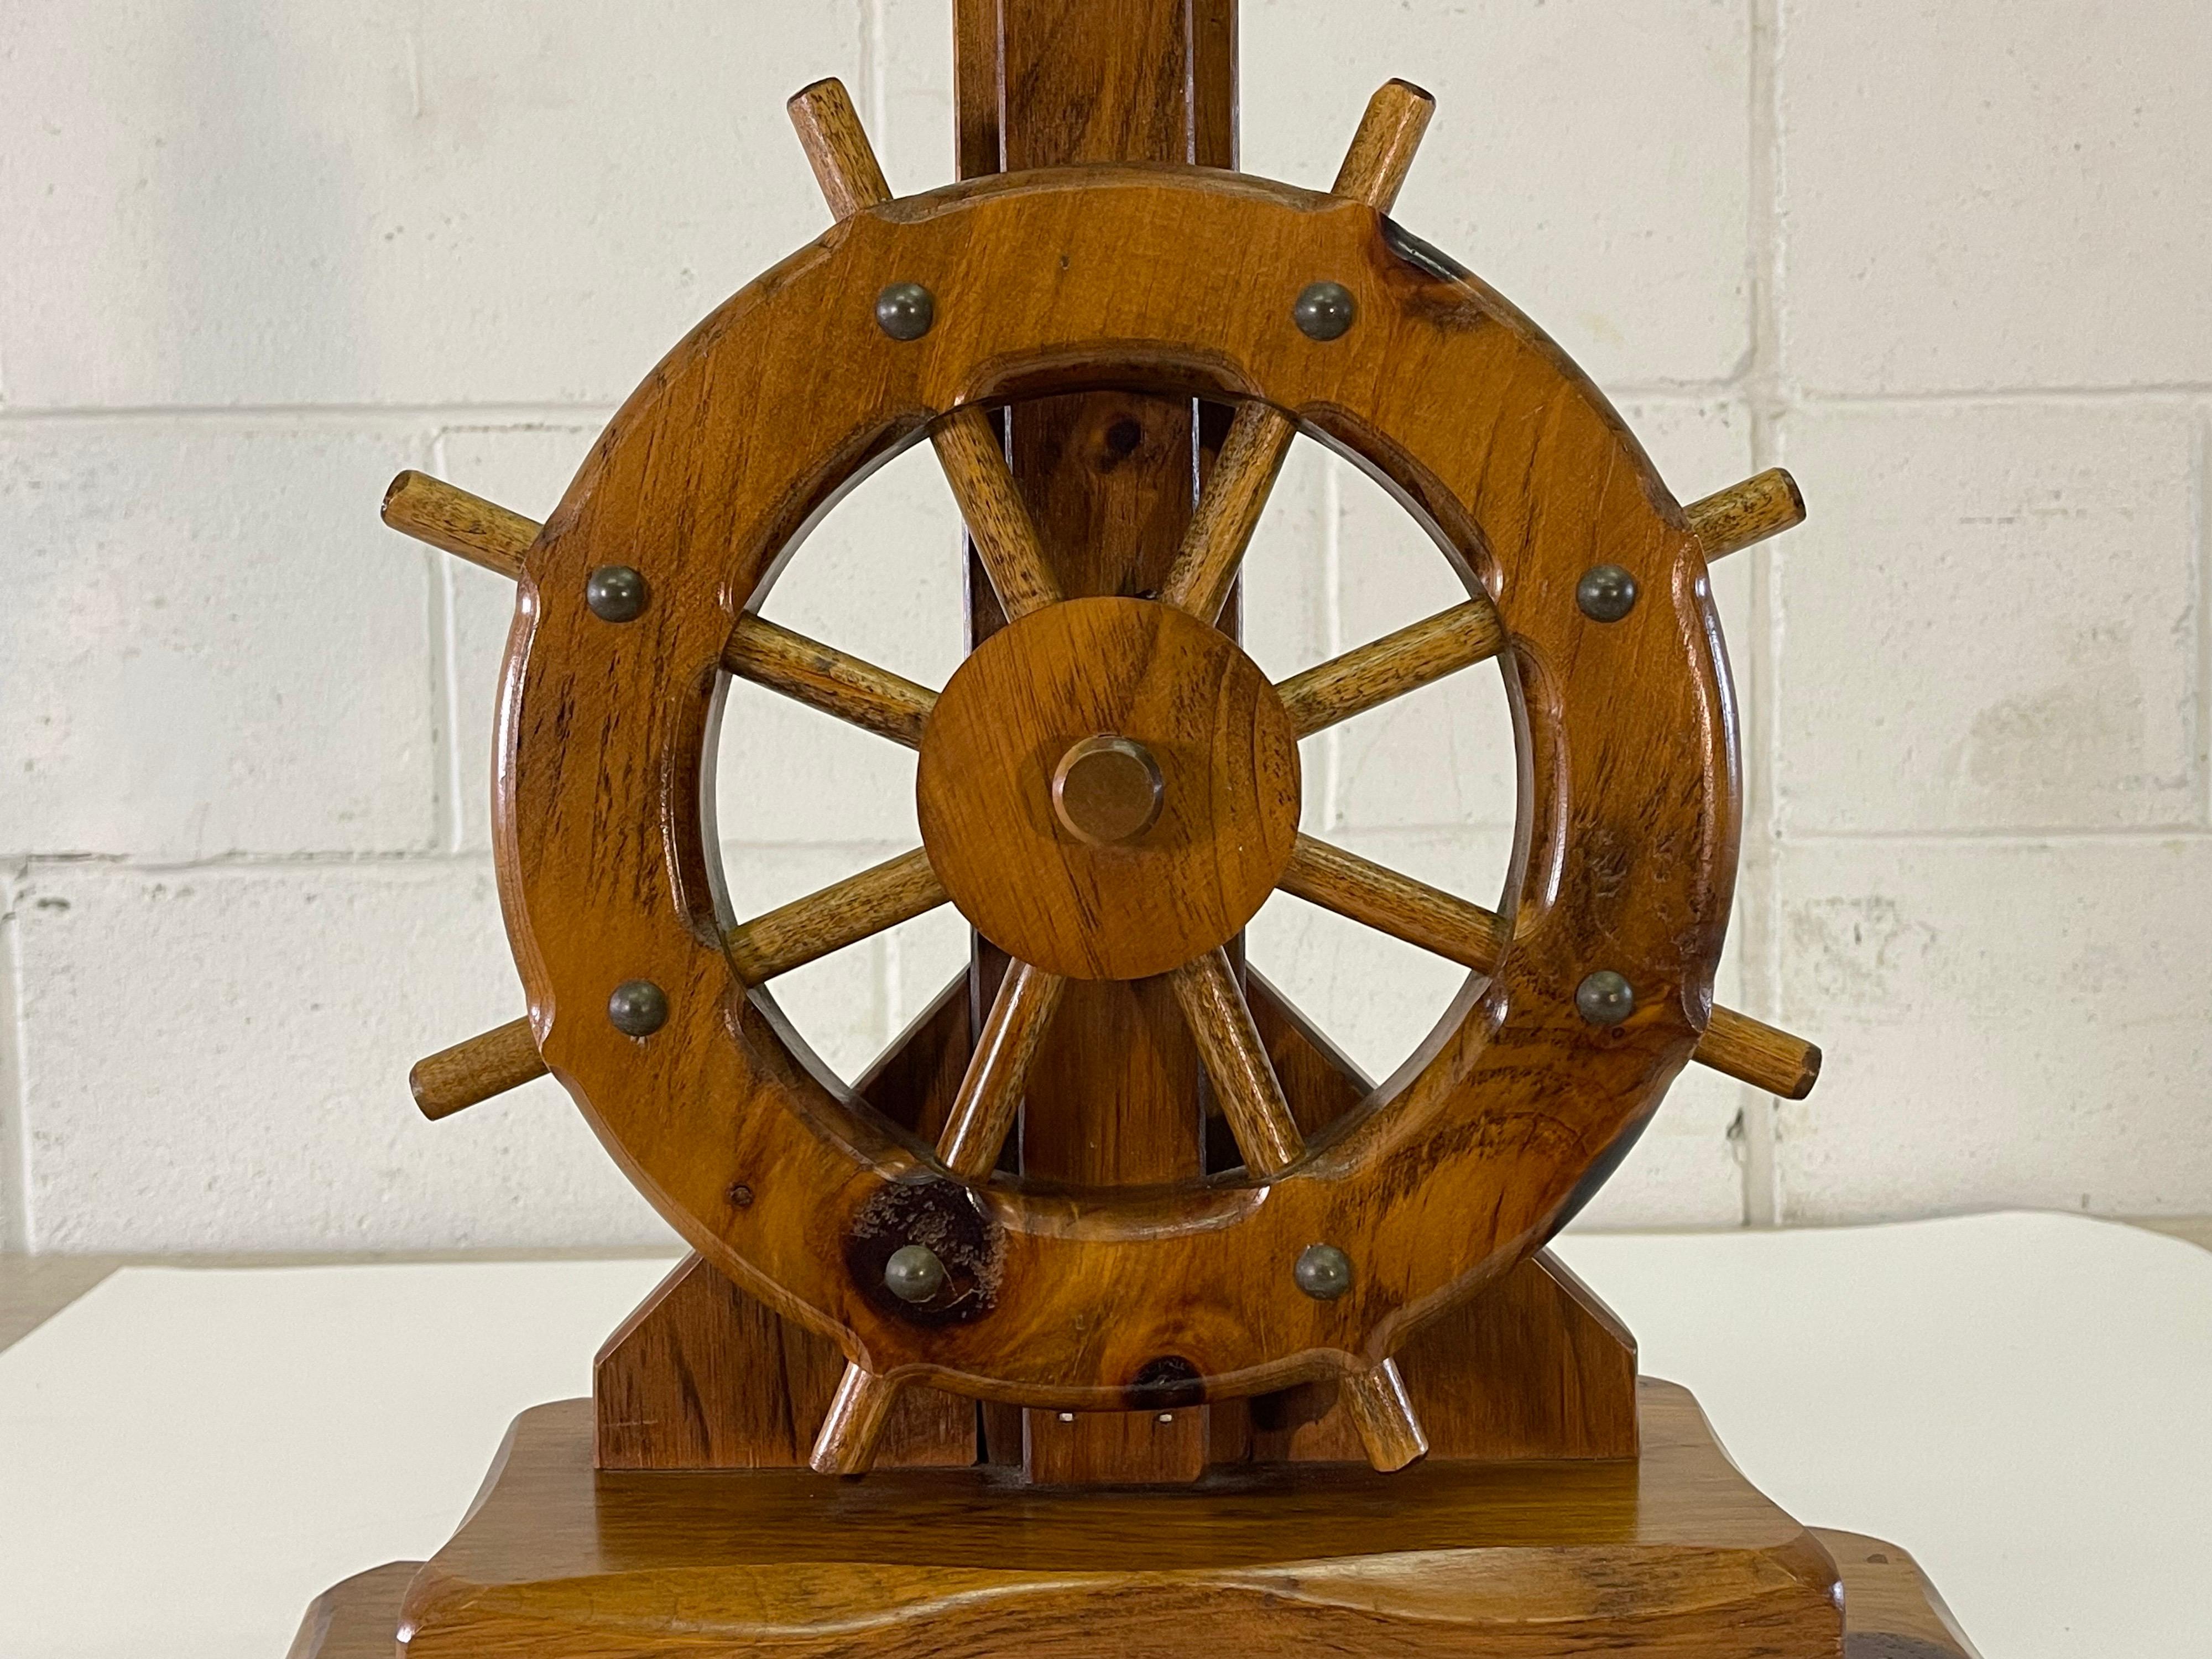 Vintage 1970s nautical ships wheel pine wood table lamp with a rope accented base. Wired for the US and in working condition. No marks.